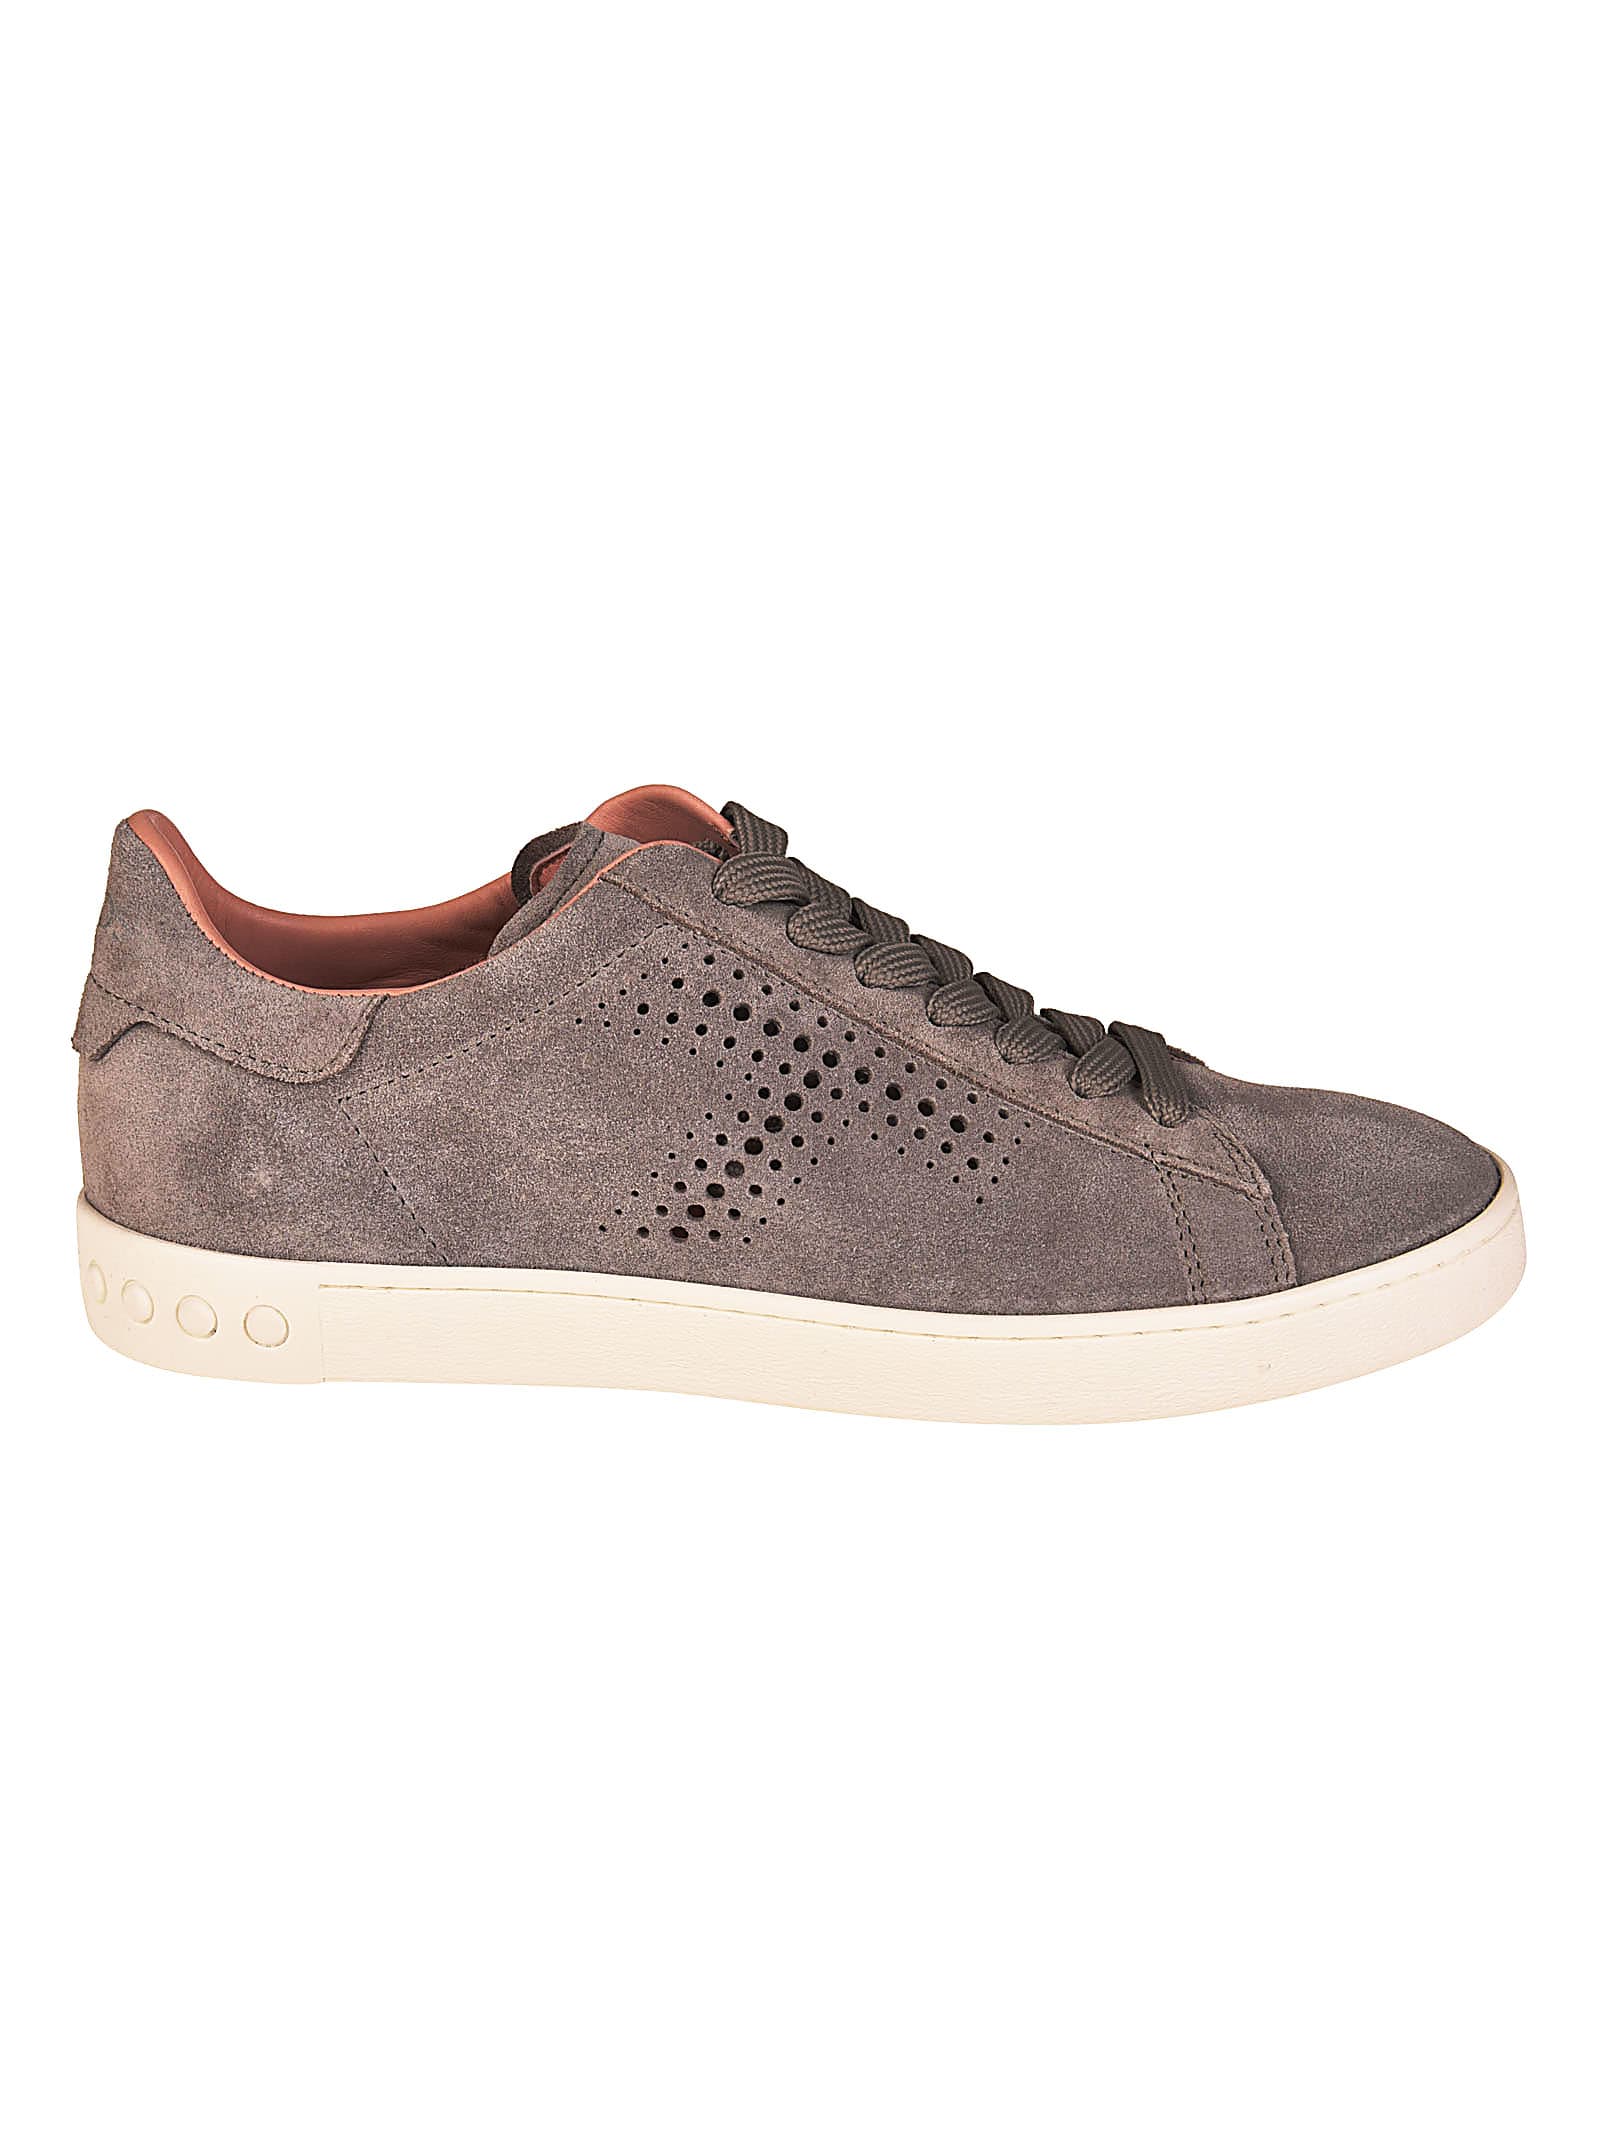 Buy Tods Sneakers online, shop Tods shoes with free shipping